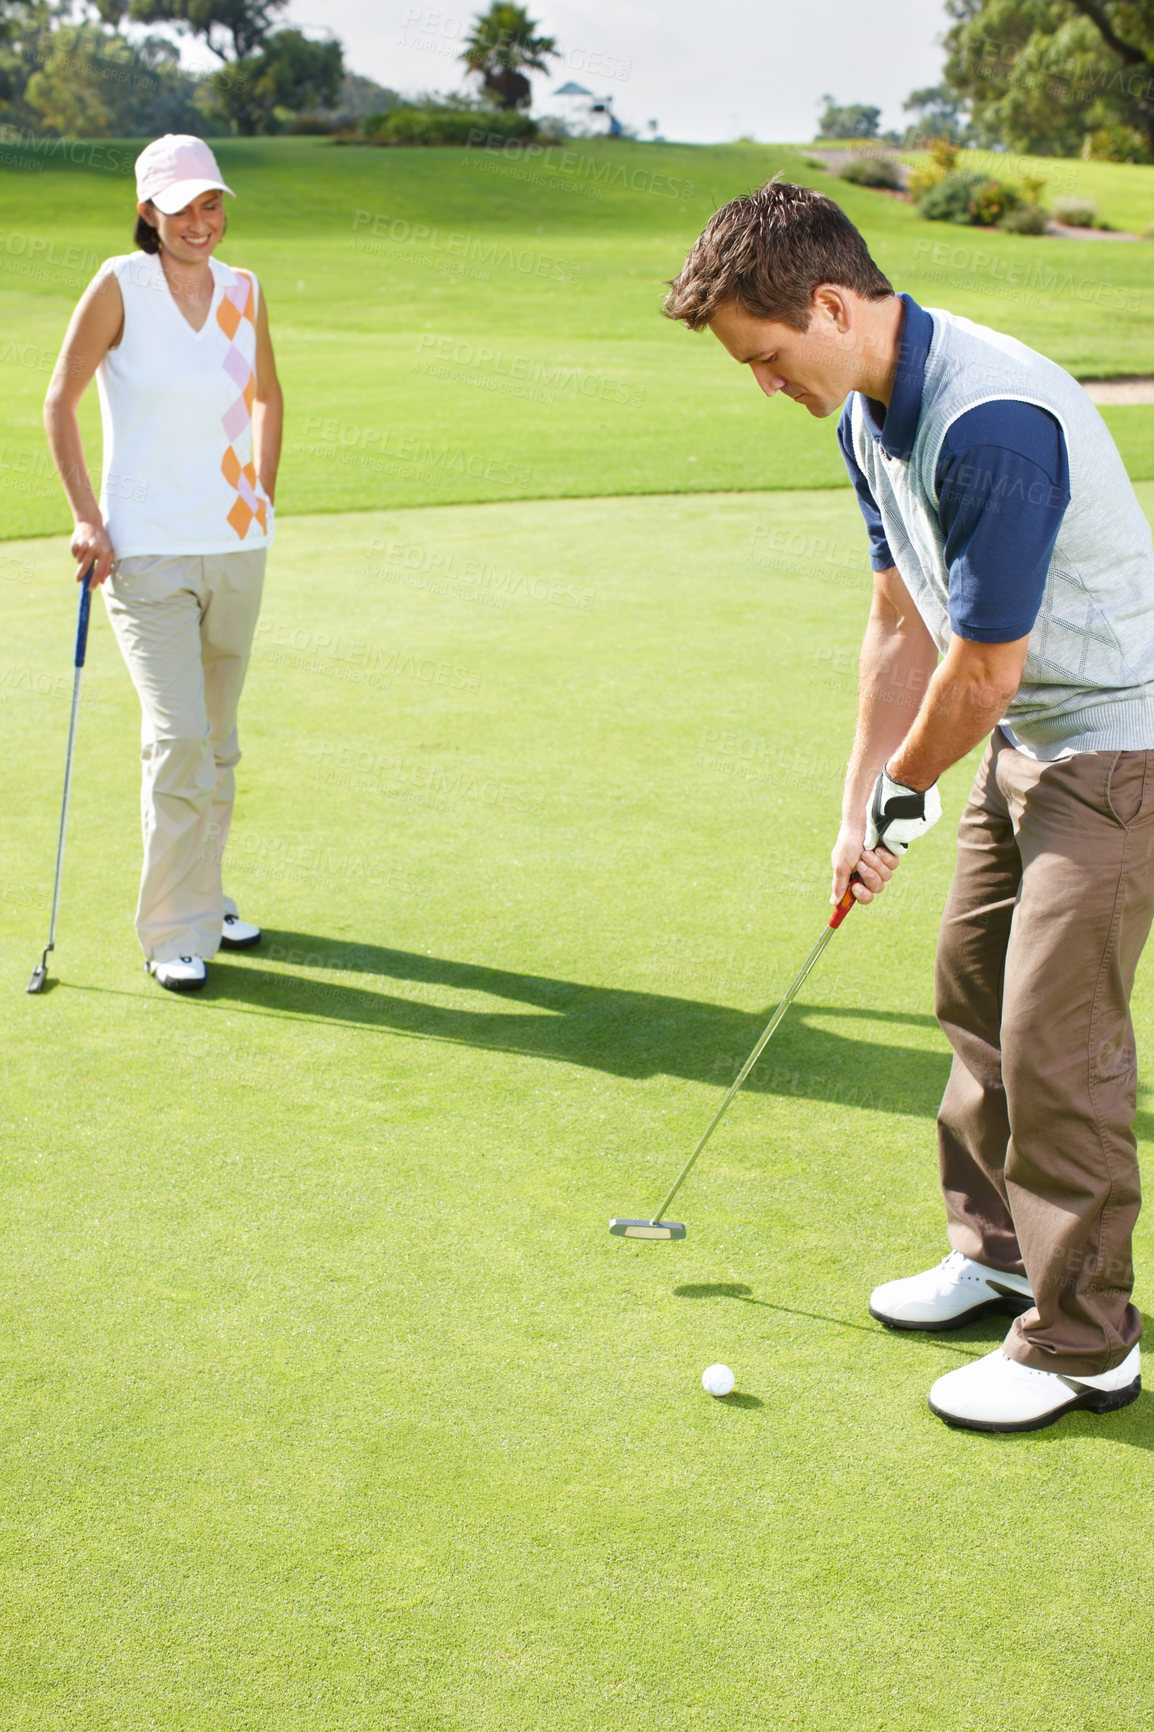 Buy stock photo Young couple playing golf together on the green